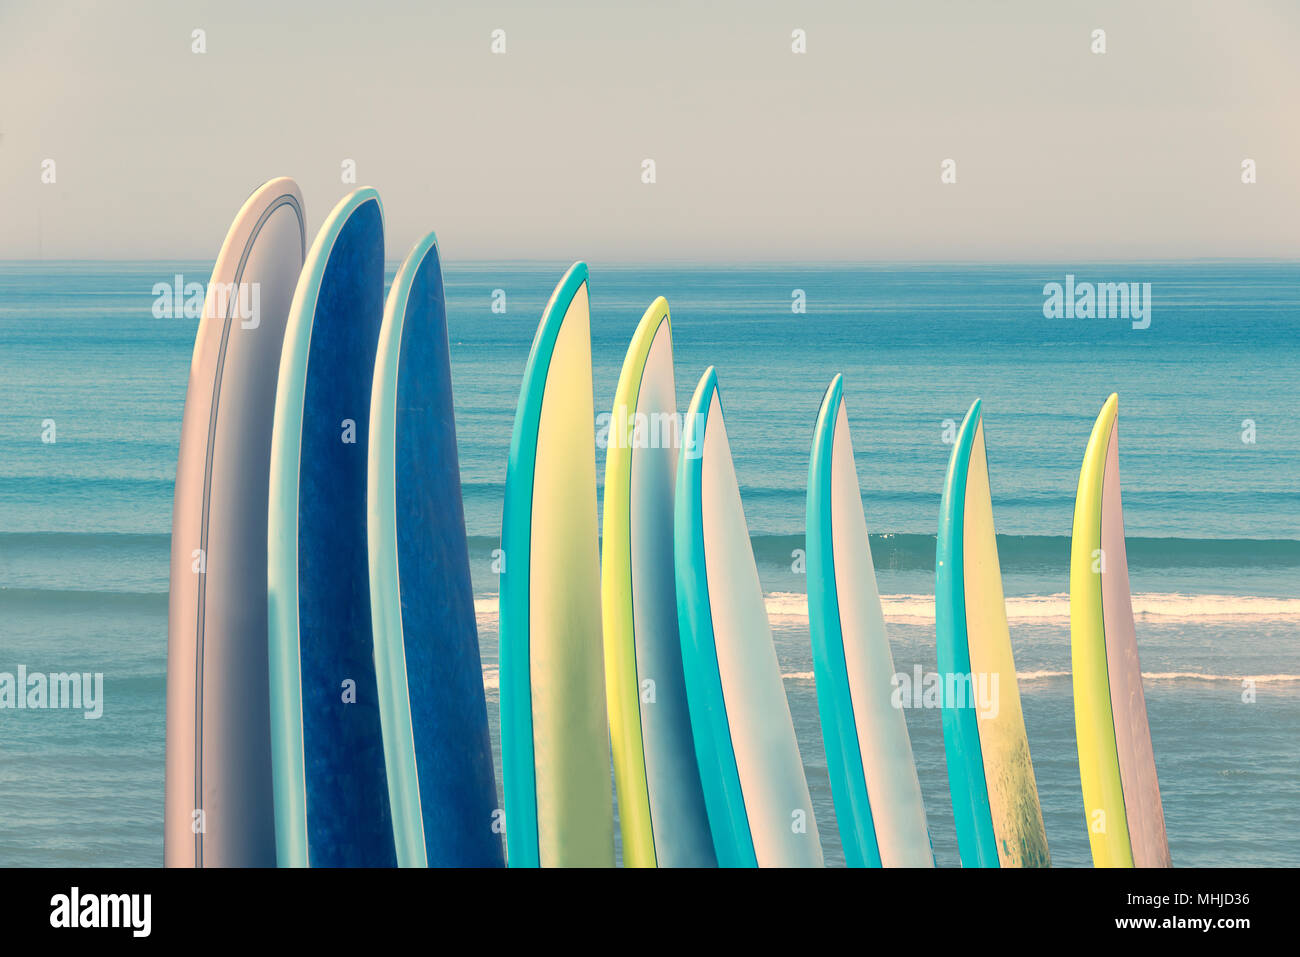 Stack of colorful surfboads on ocean background with waves, retro vintage filter Stock Photo